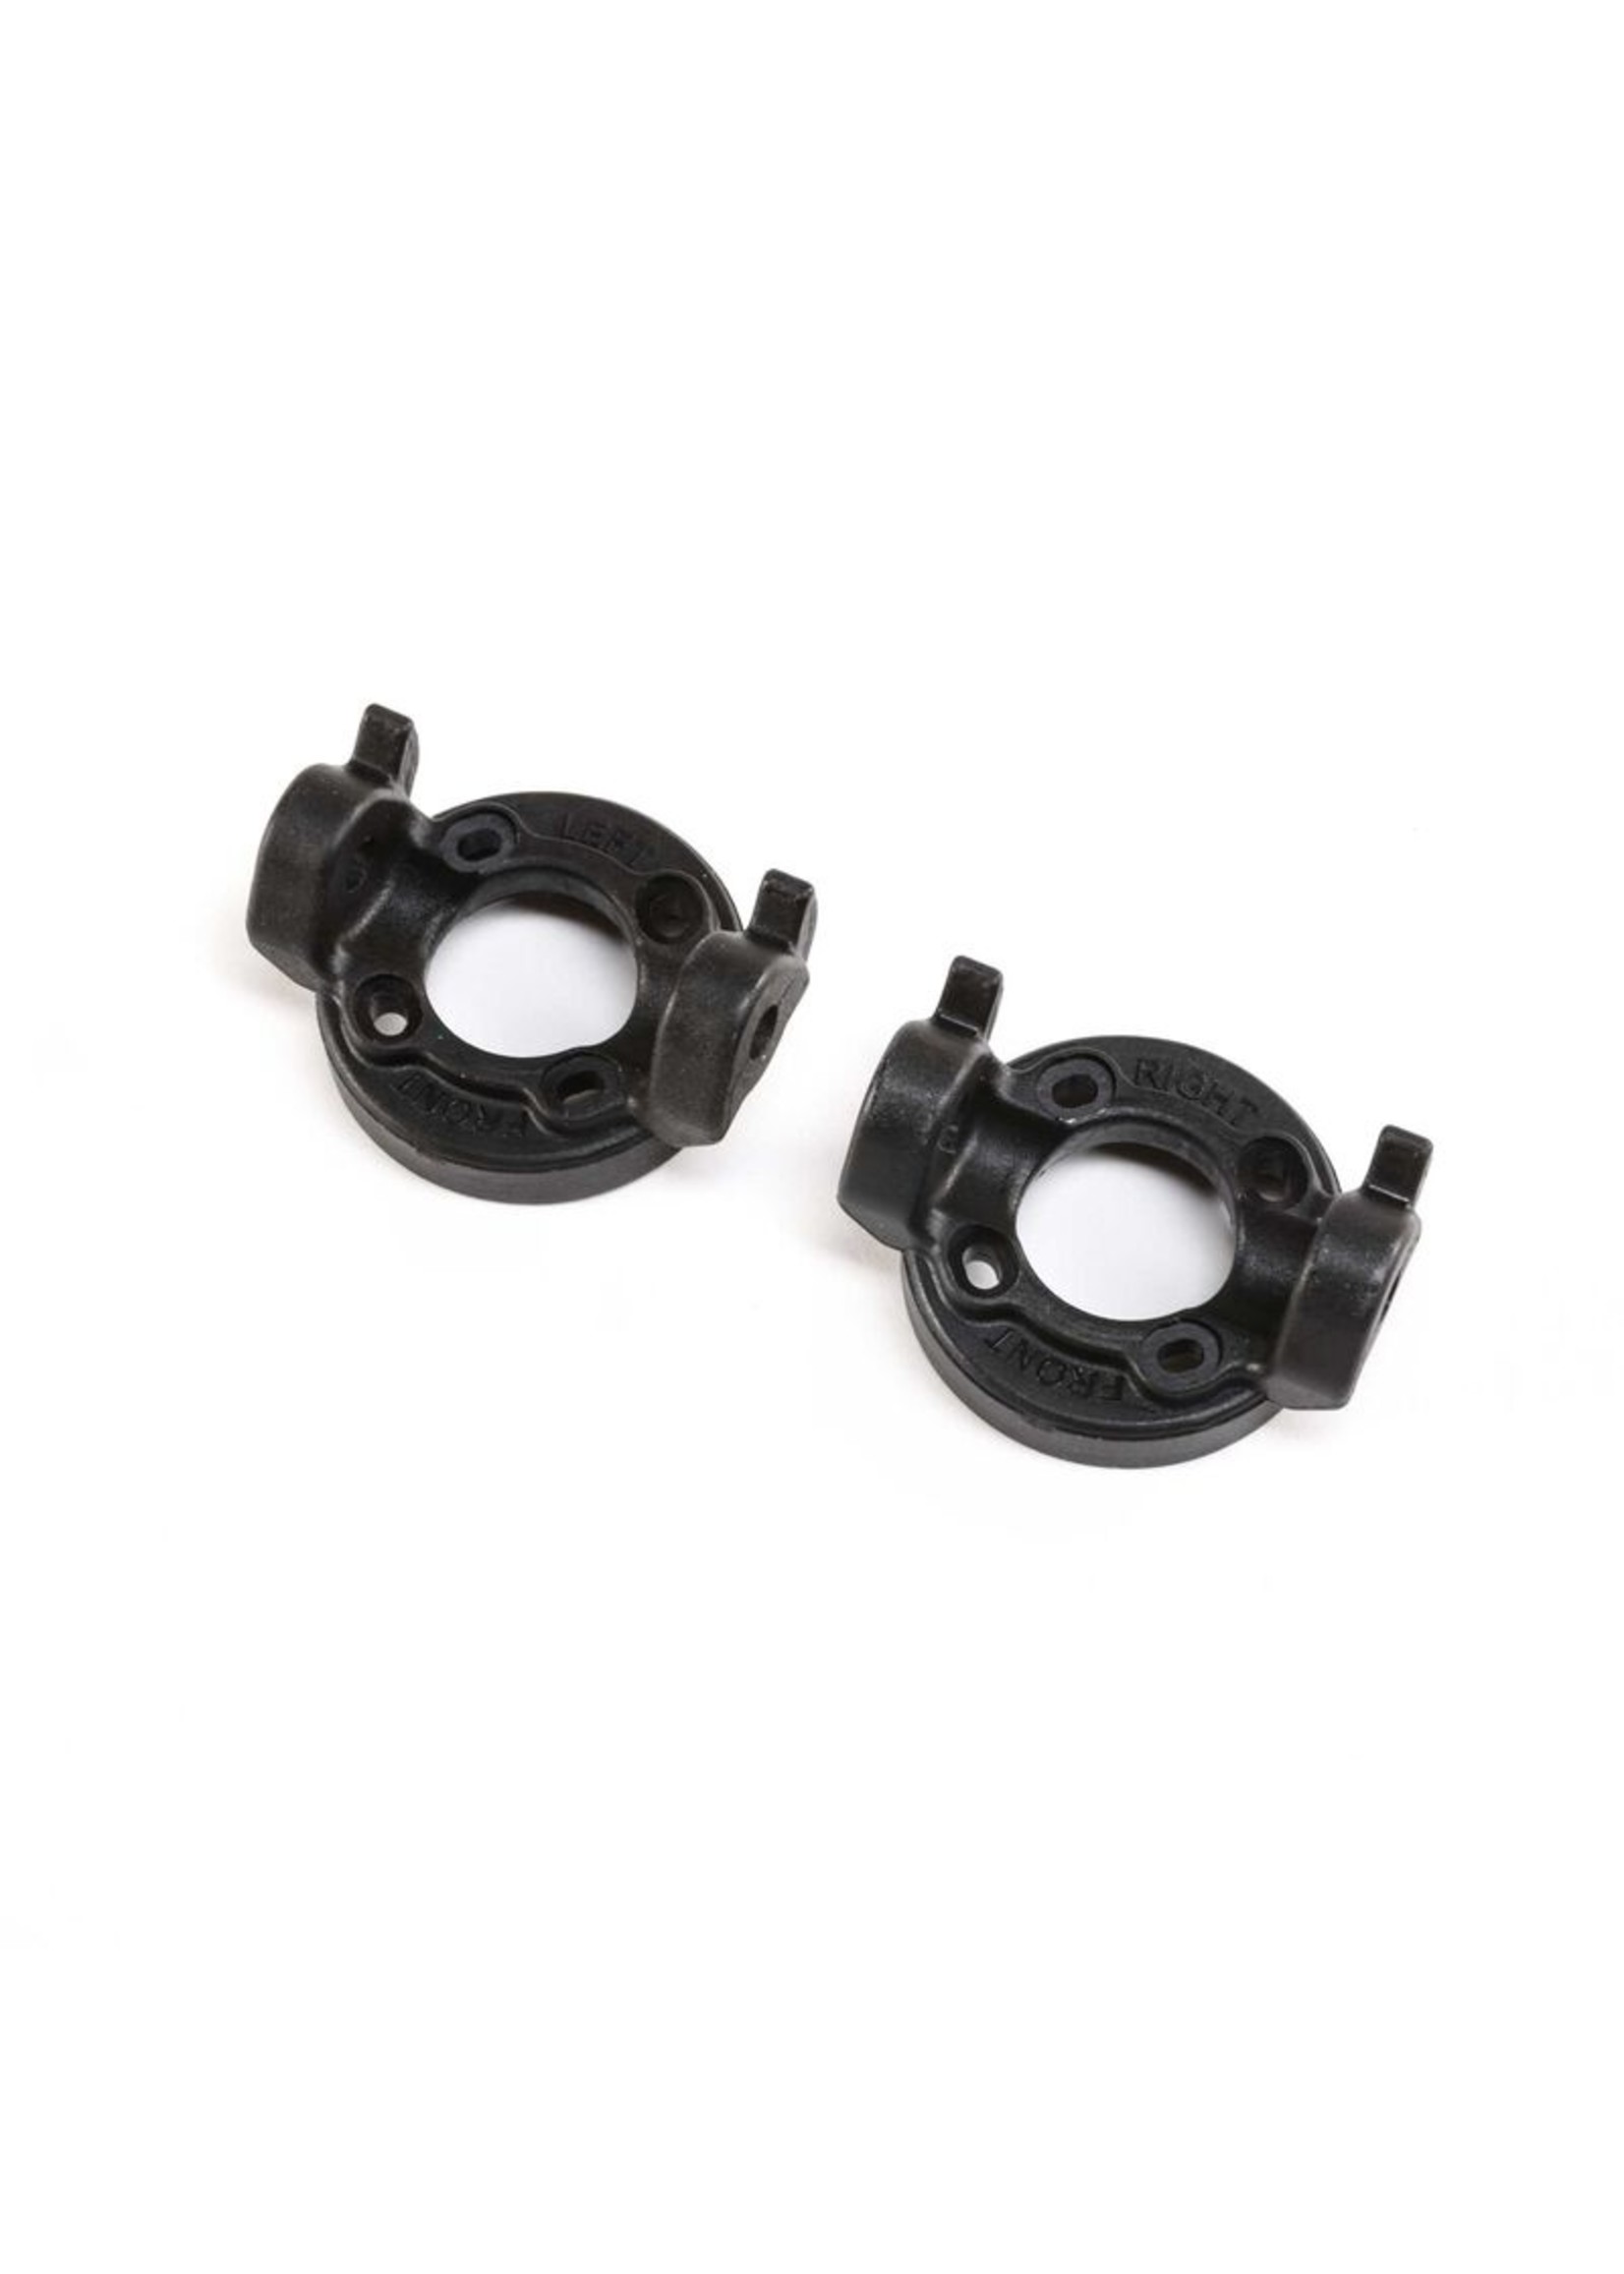 Losi LOS244003 - Spindle Carrier Set Left / Right: LMT